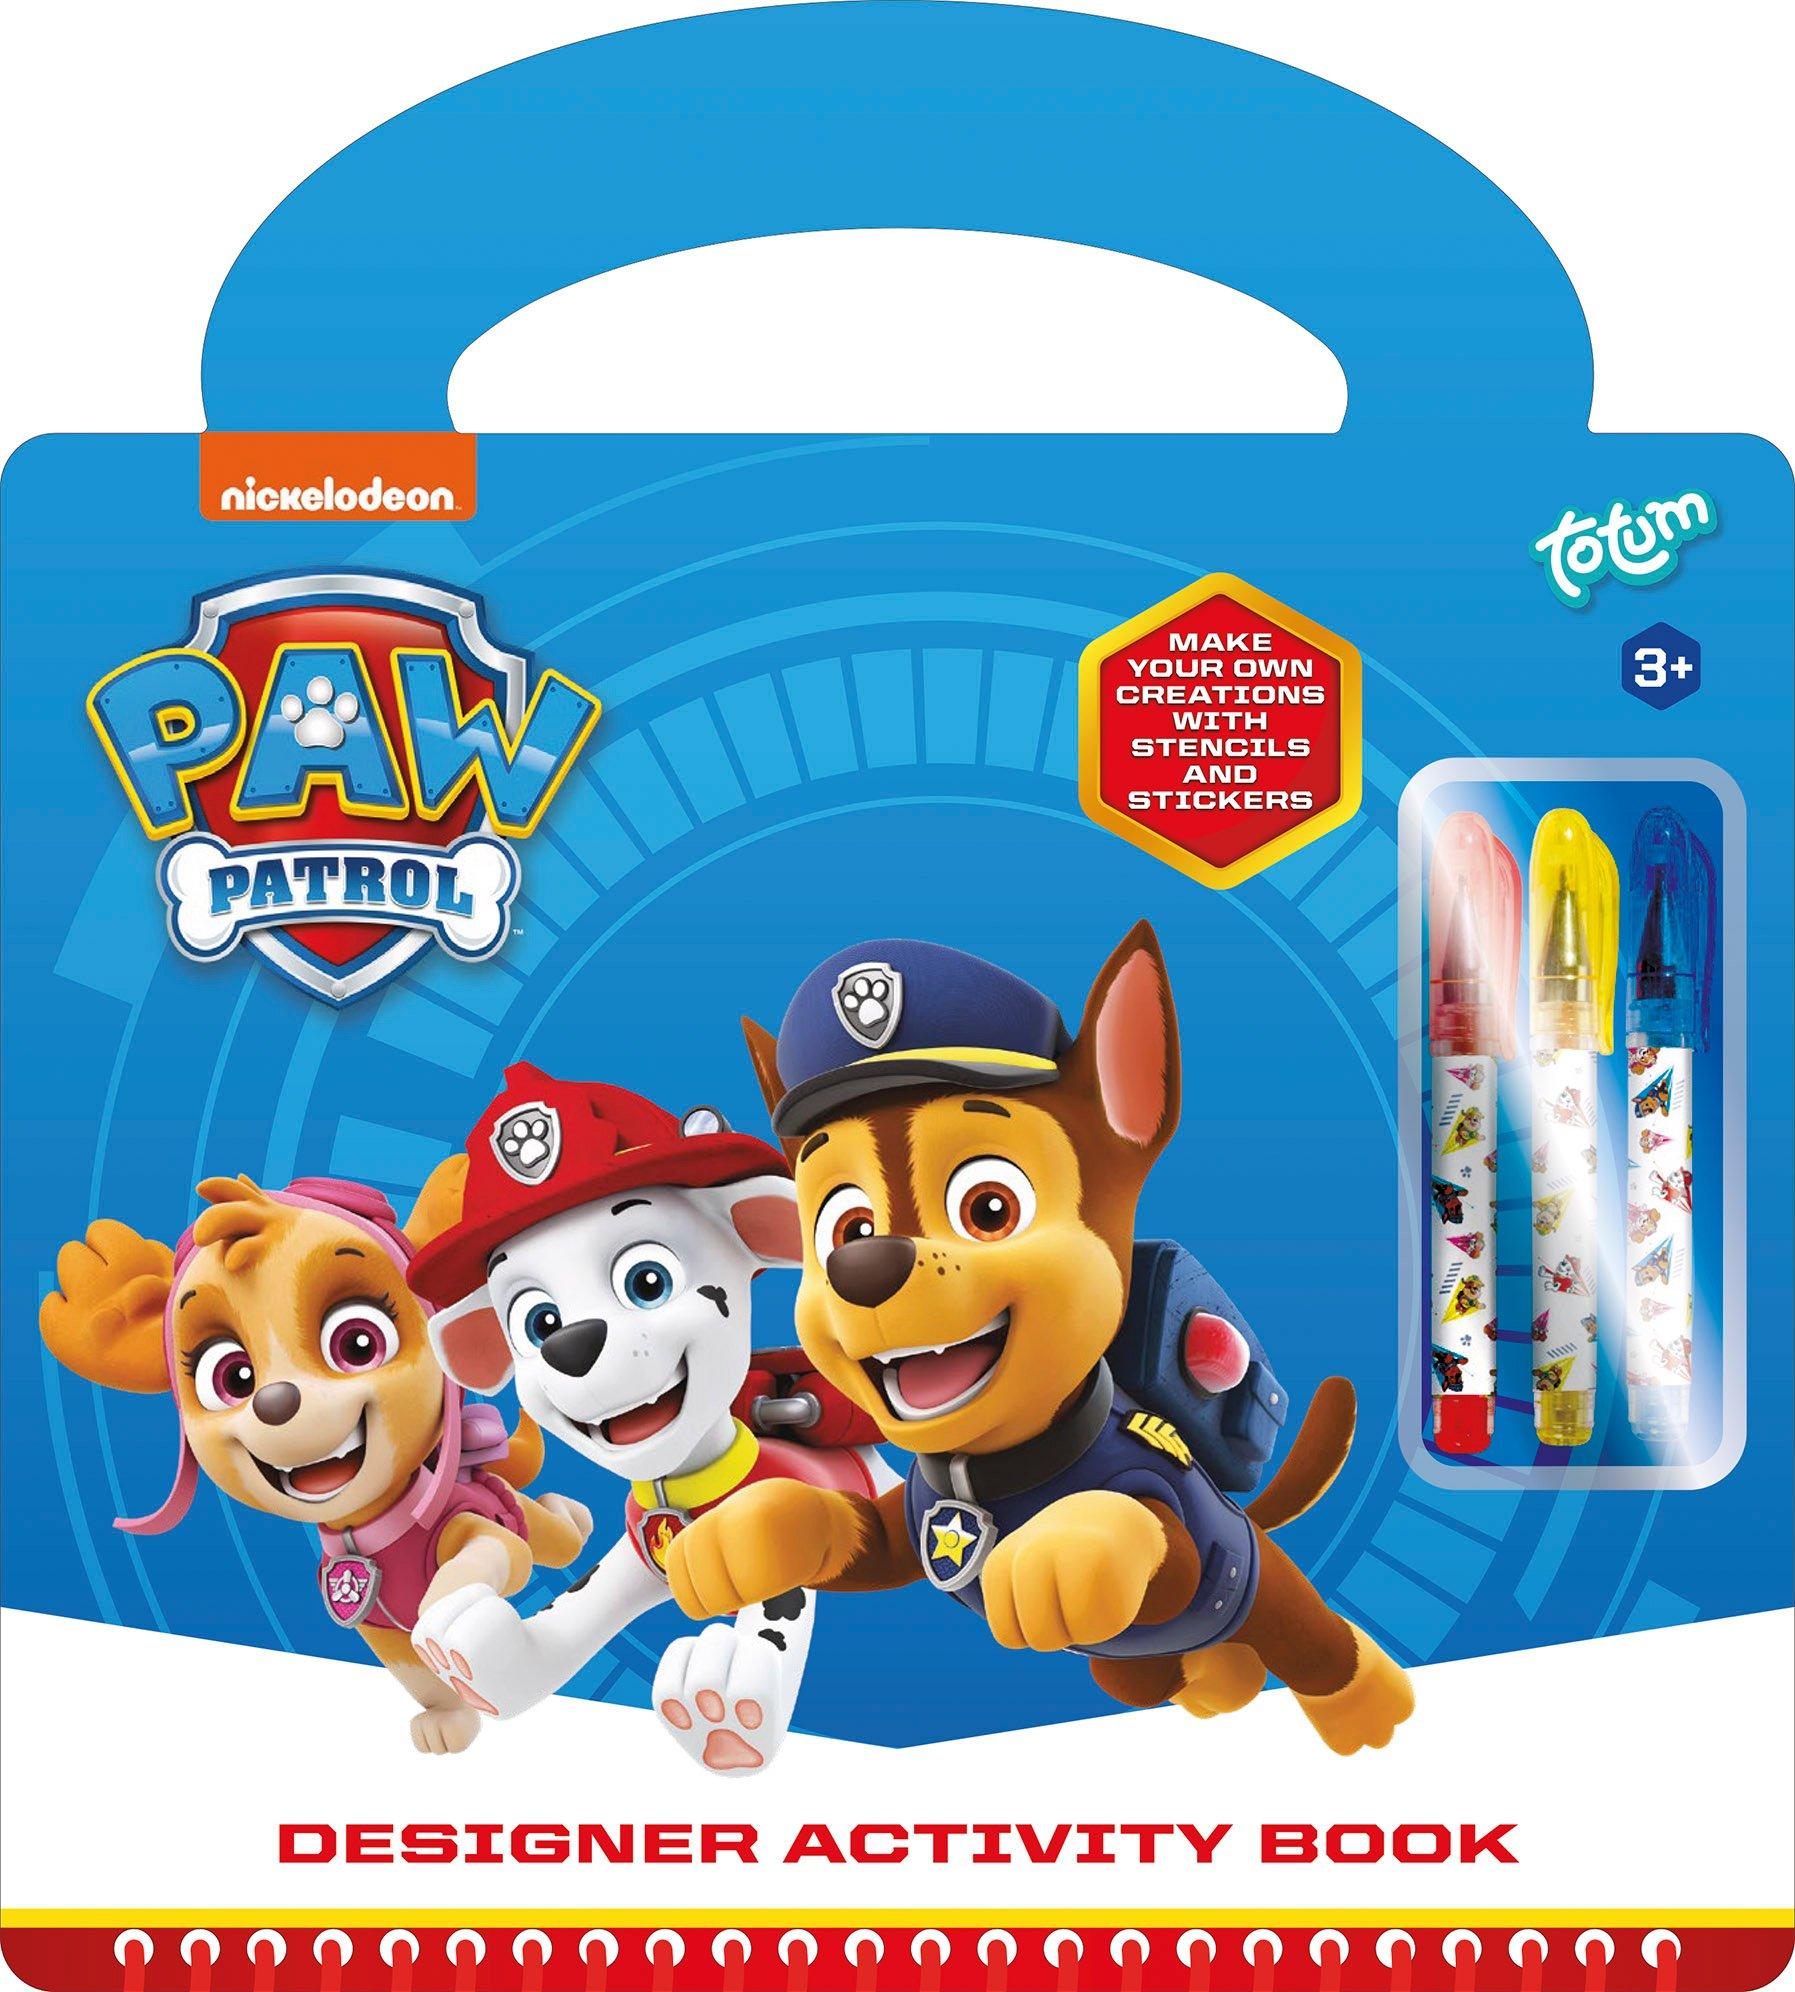 Paw Patrol 85-piece designer drawing and activity book